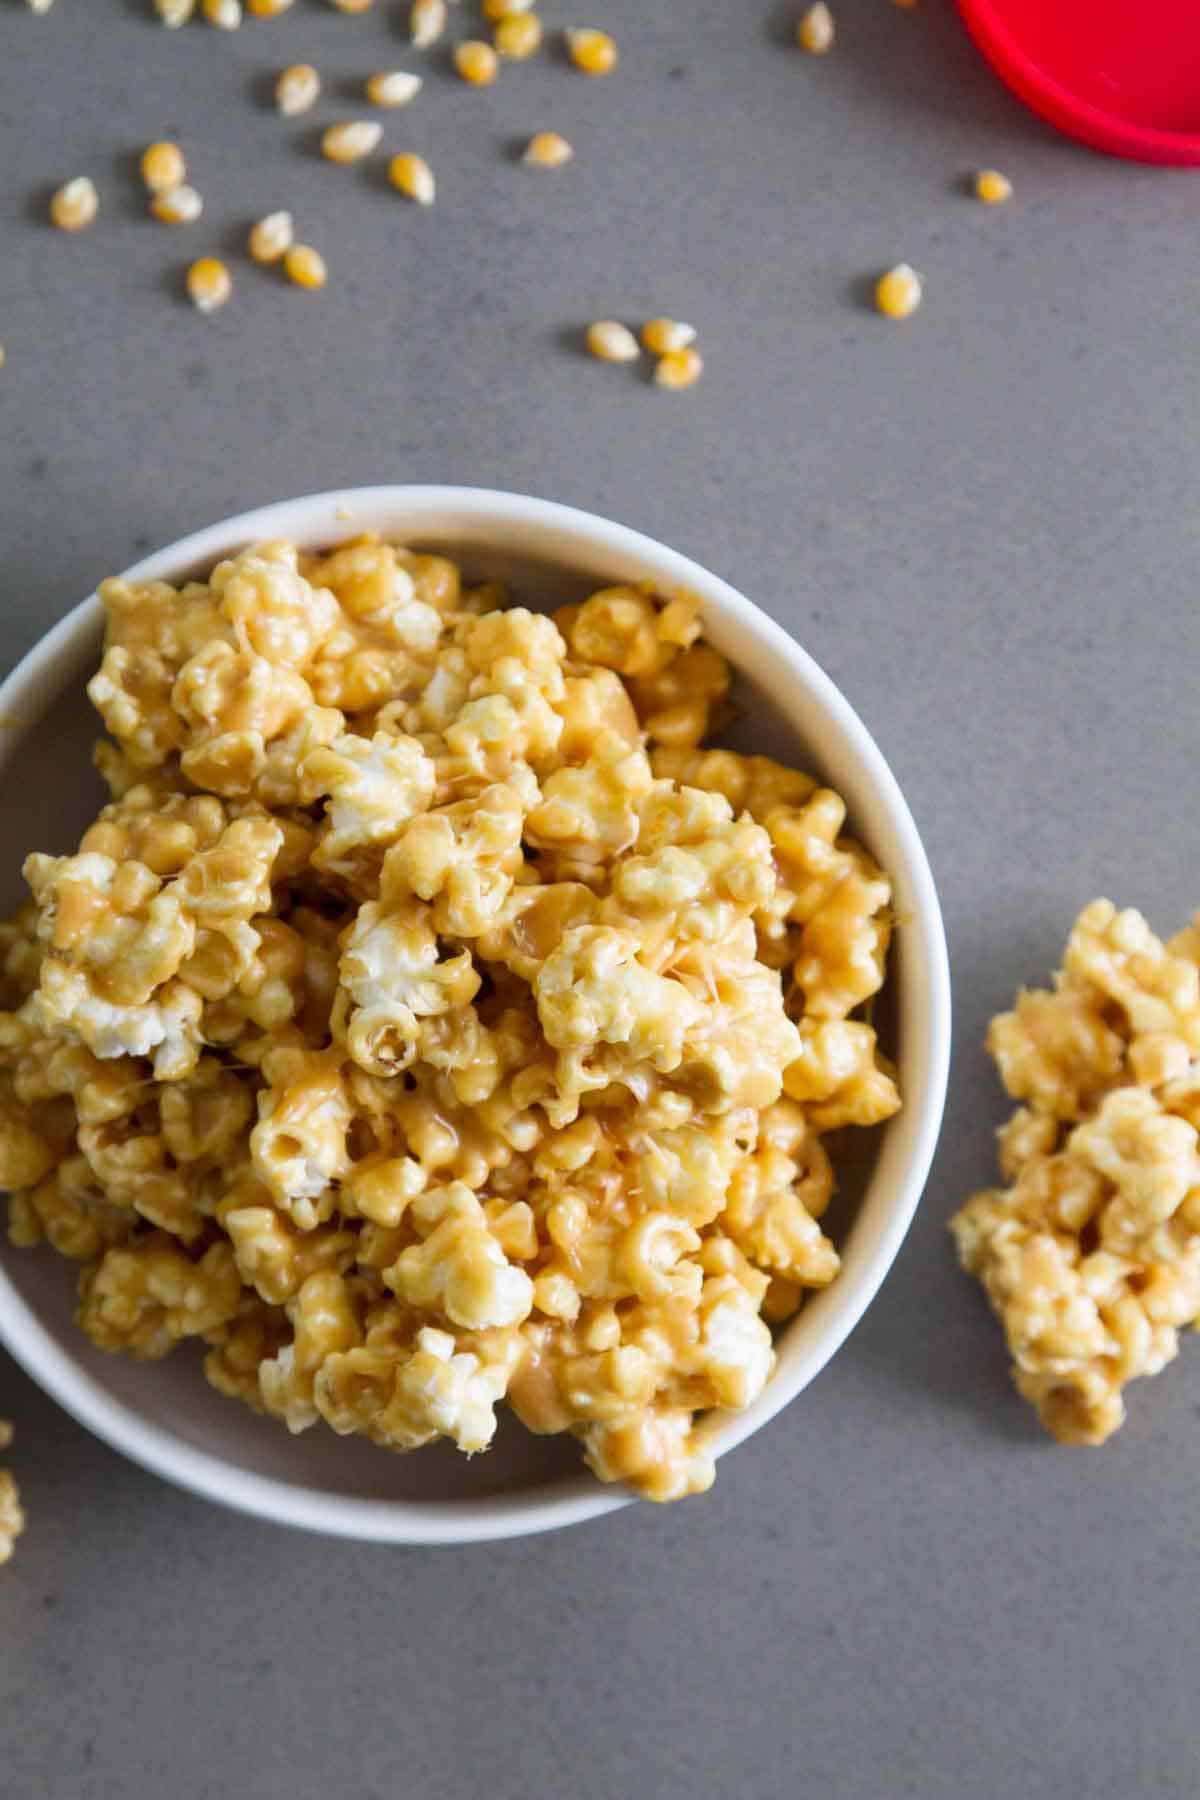 Bowl of peanut butter popcorn with popcorn spilling out.